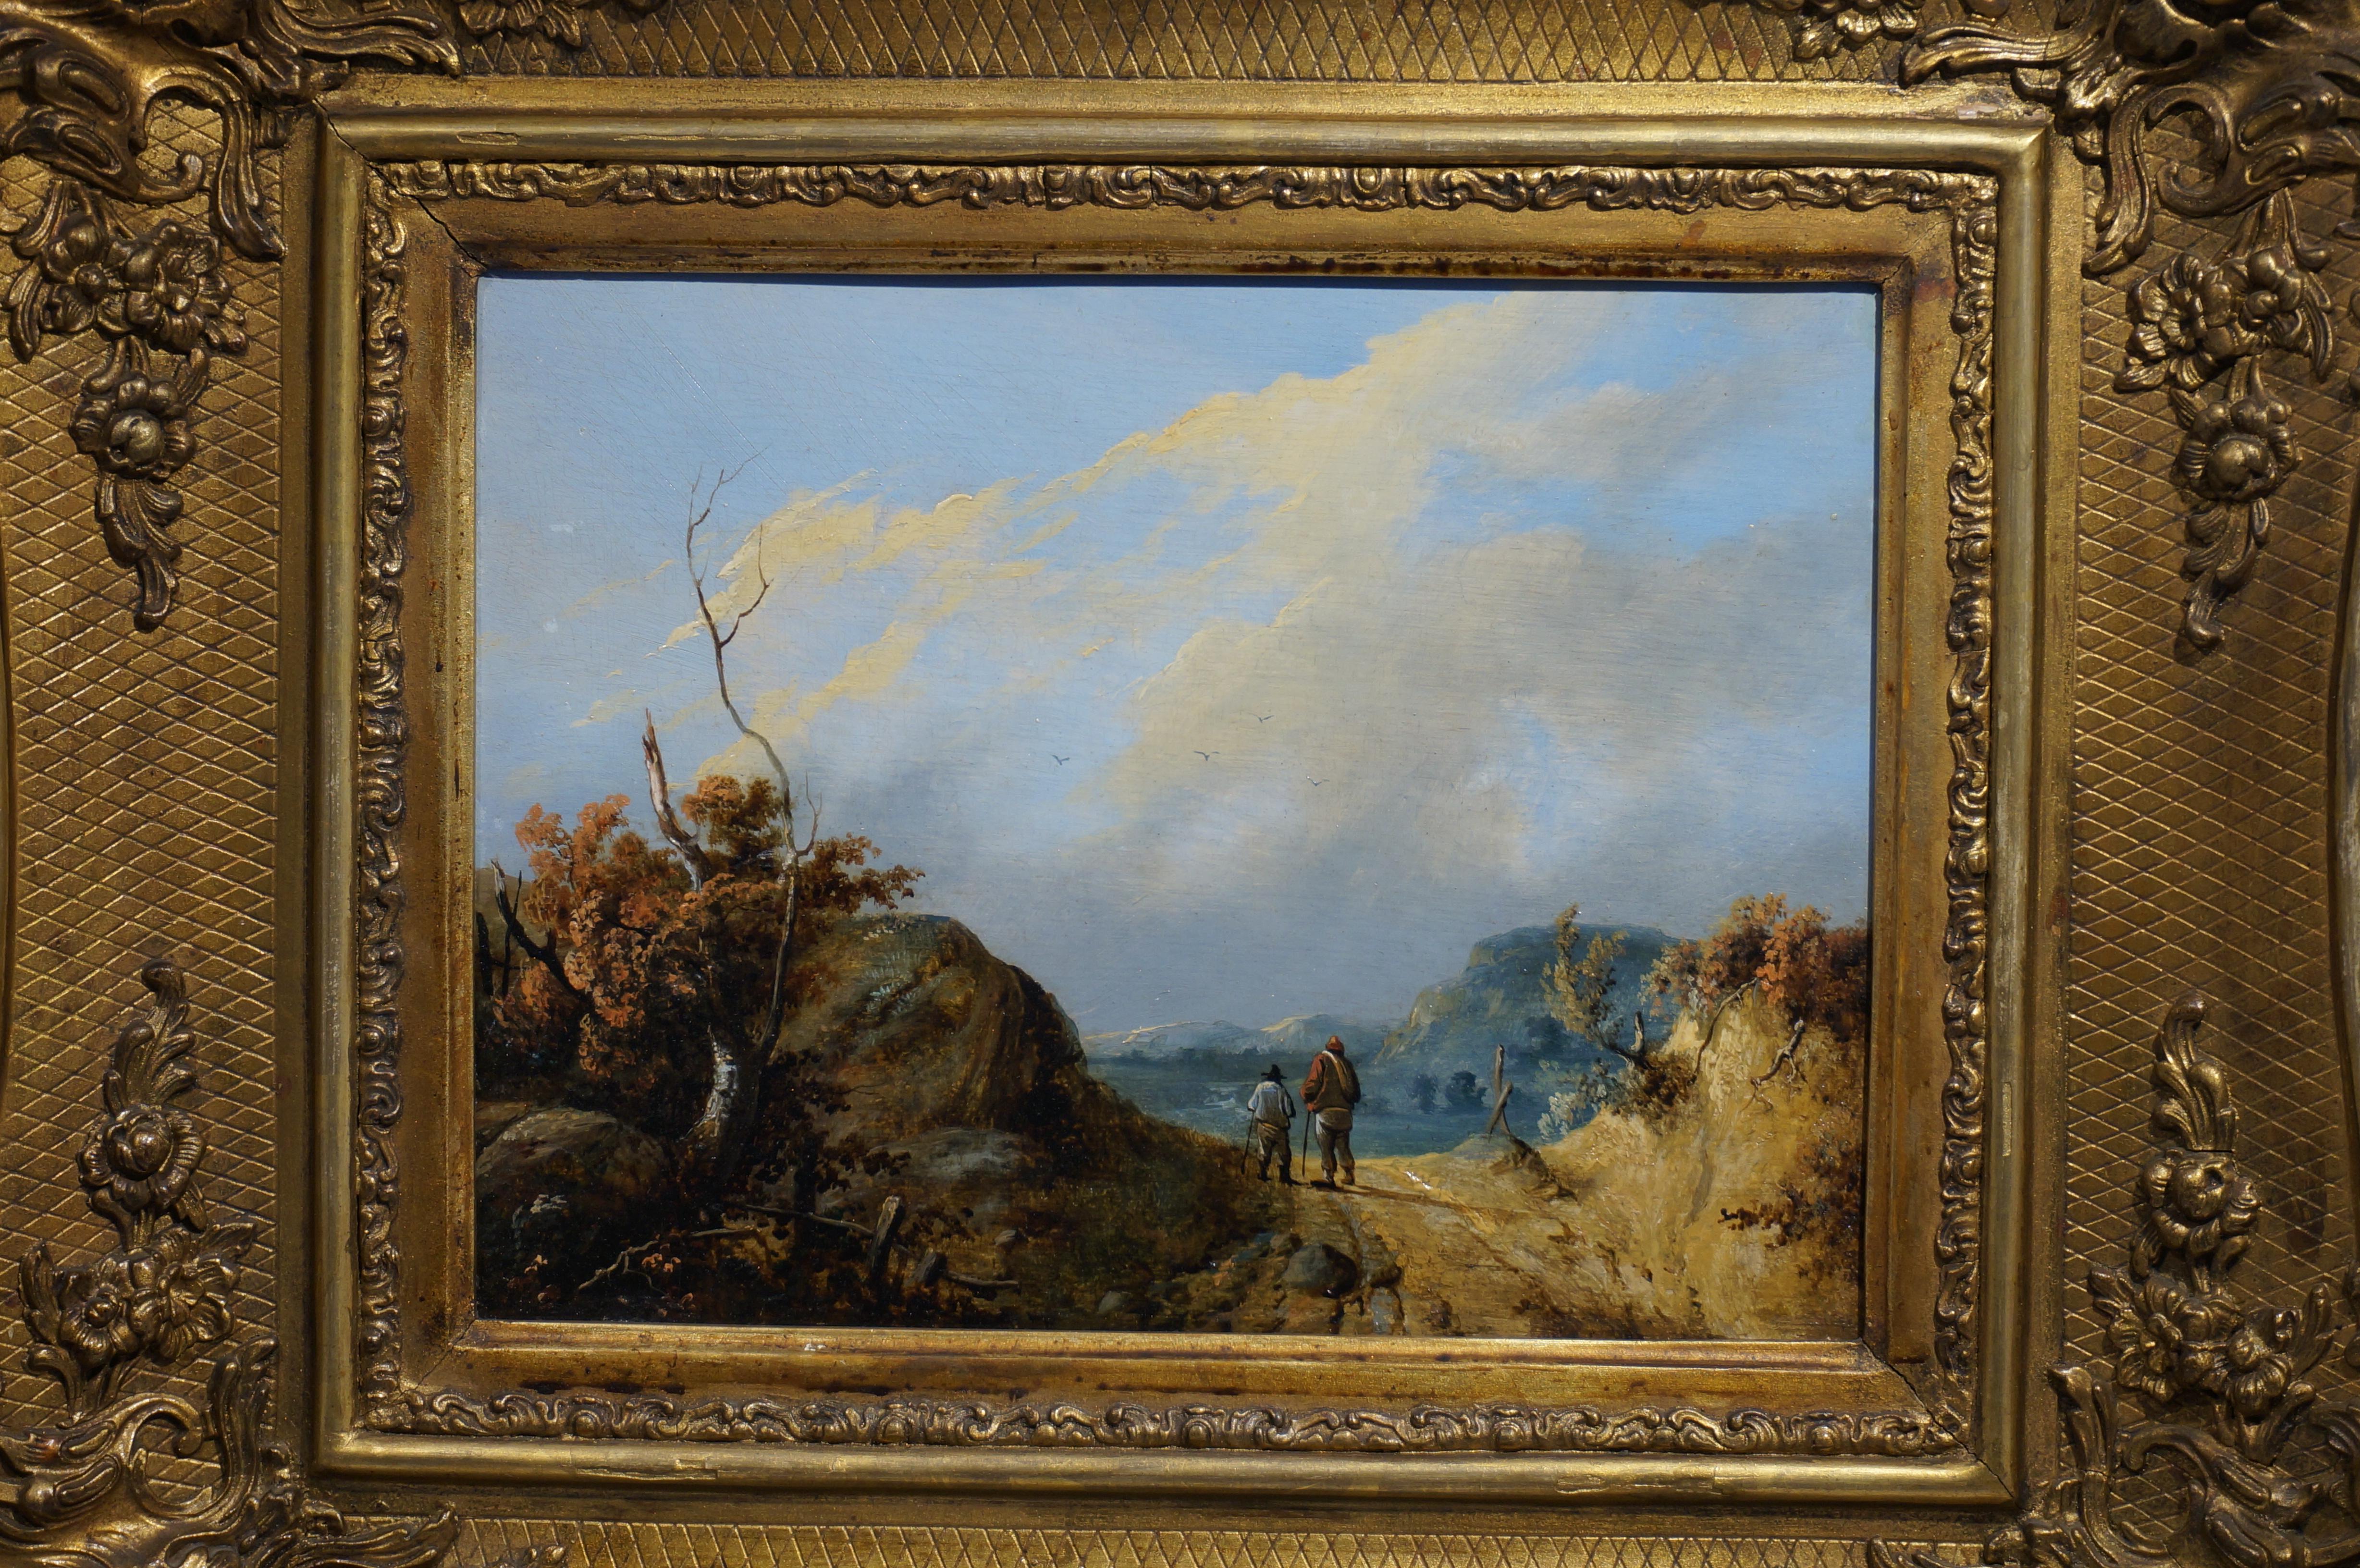 Pair of Romantic landscape paintings (pendant) with figures, Inspired by 17th century Dutch landscape painting
Oil on panel
In gilt wooden frame

Not signed, artist unknown

Dimensions incl. frame: 45.5 x 40 cm., 46.5 x 41.5 cm.
Dimensions excl.